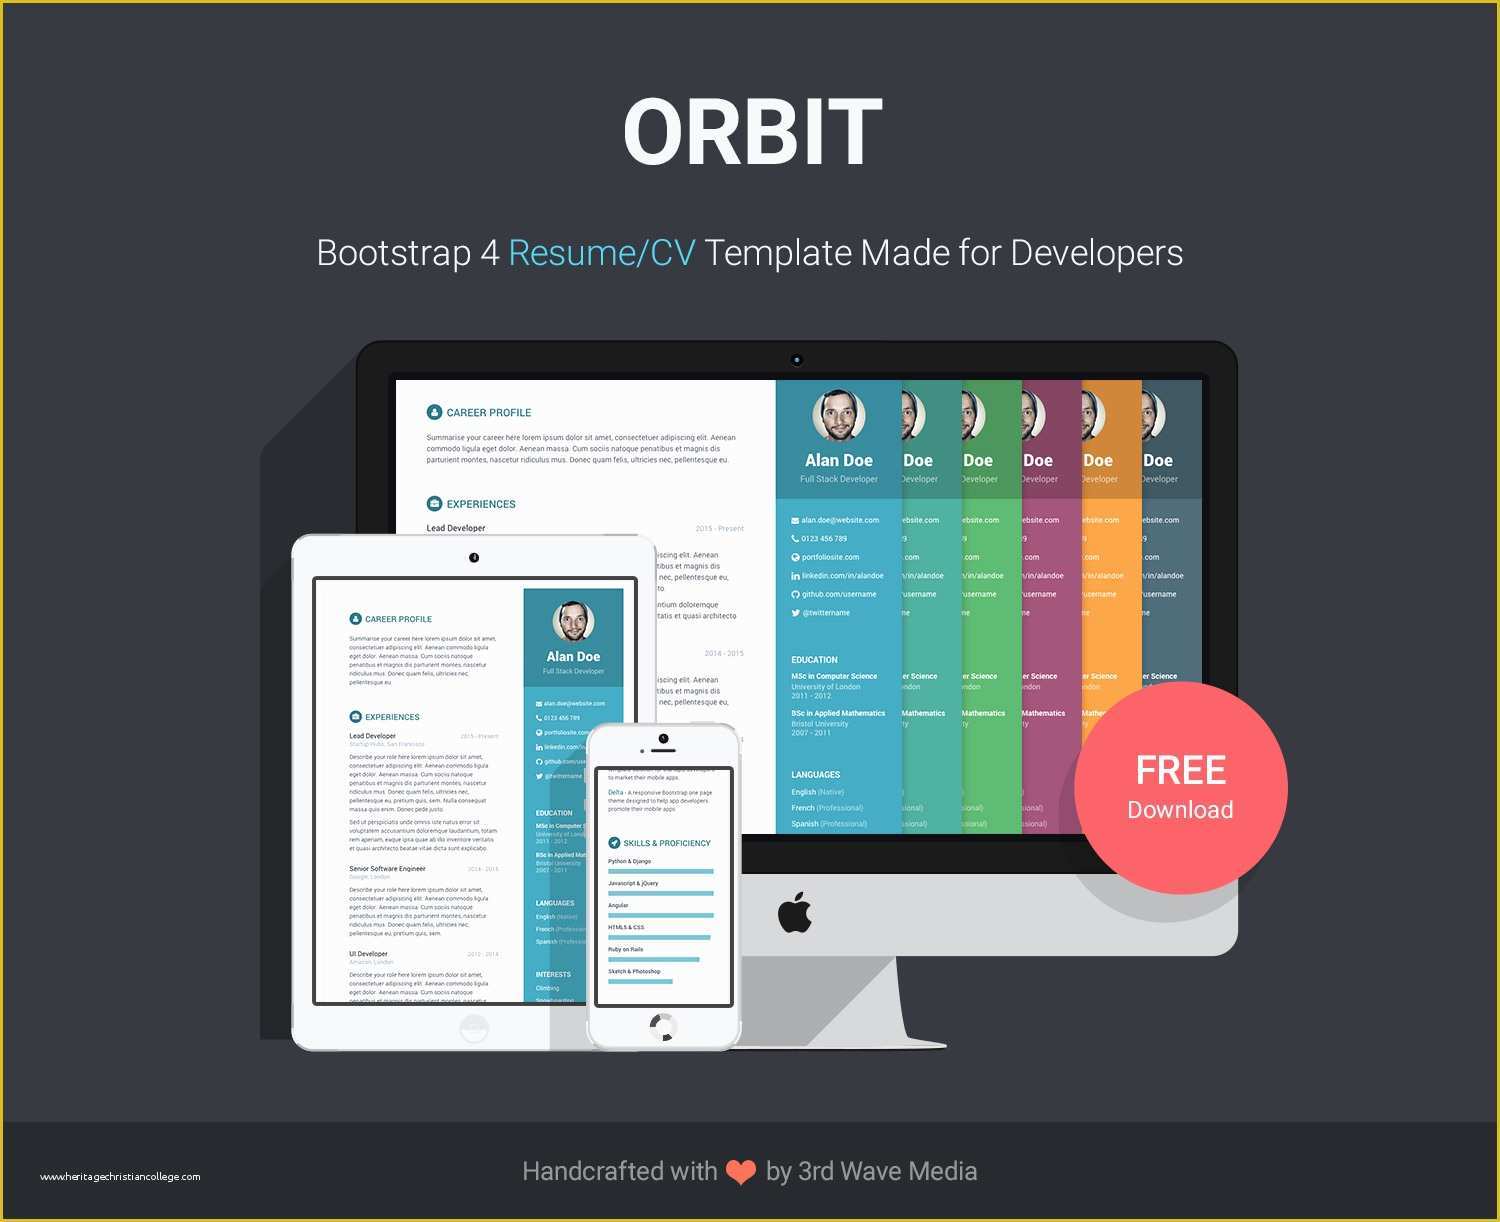 Free HTML Layout Templates Of Free Bootstrap Resume Cv Template for Developers orbit